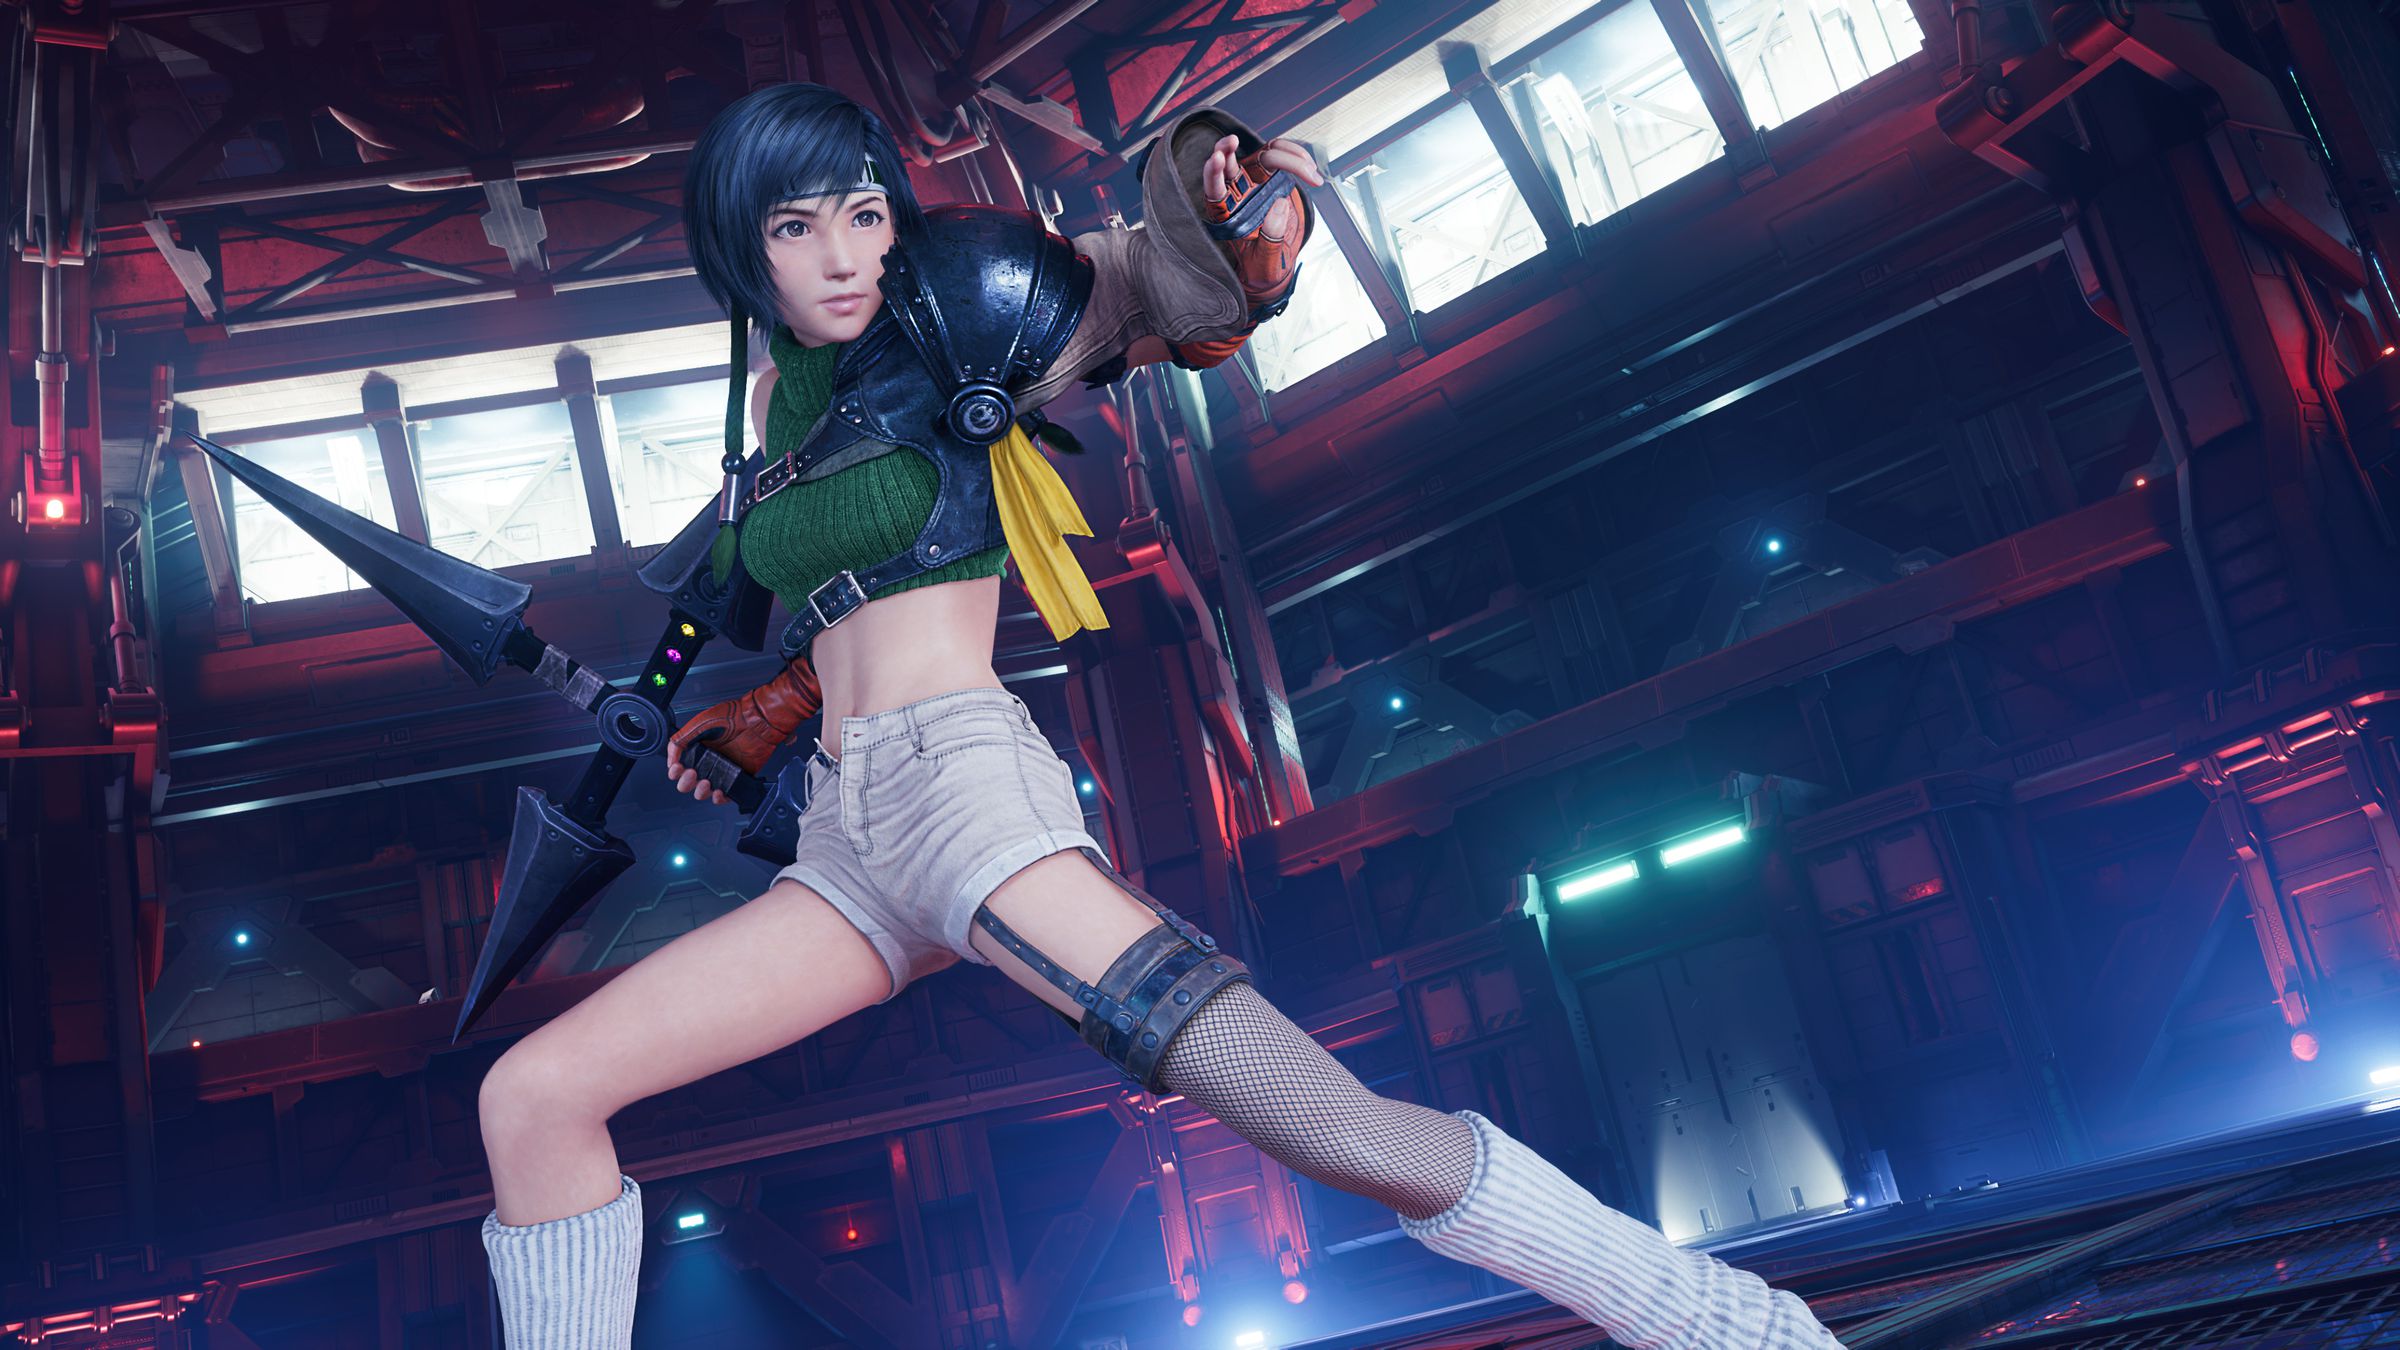 Yuffie is the featured character of Final Fantasy VII Remake’s first add-on.